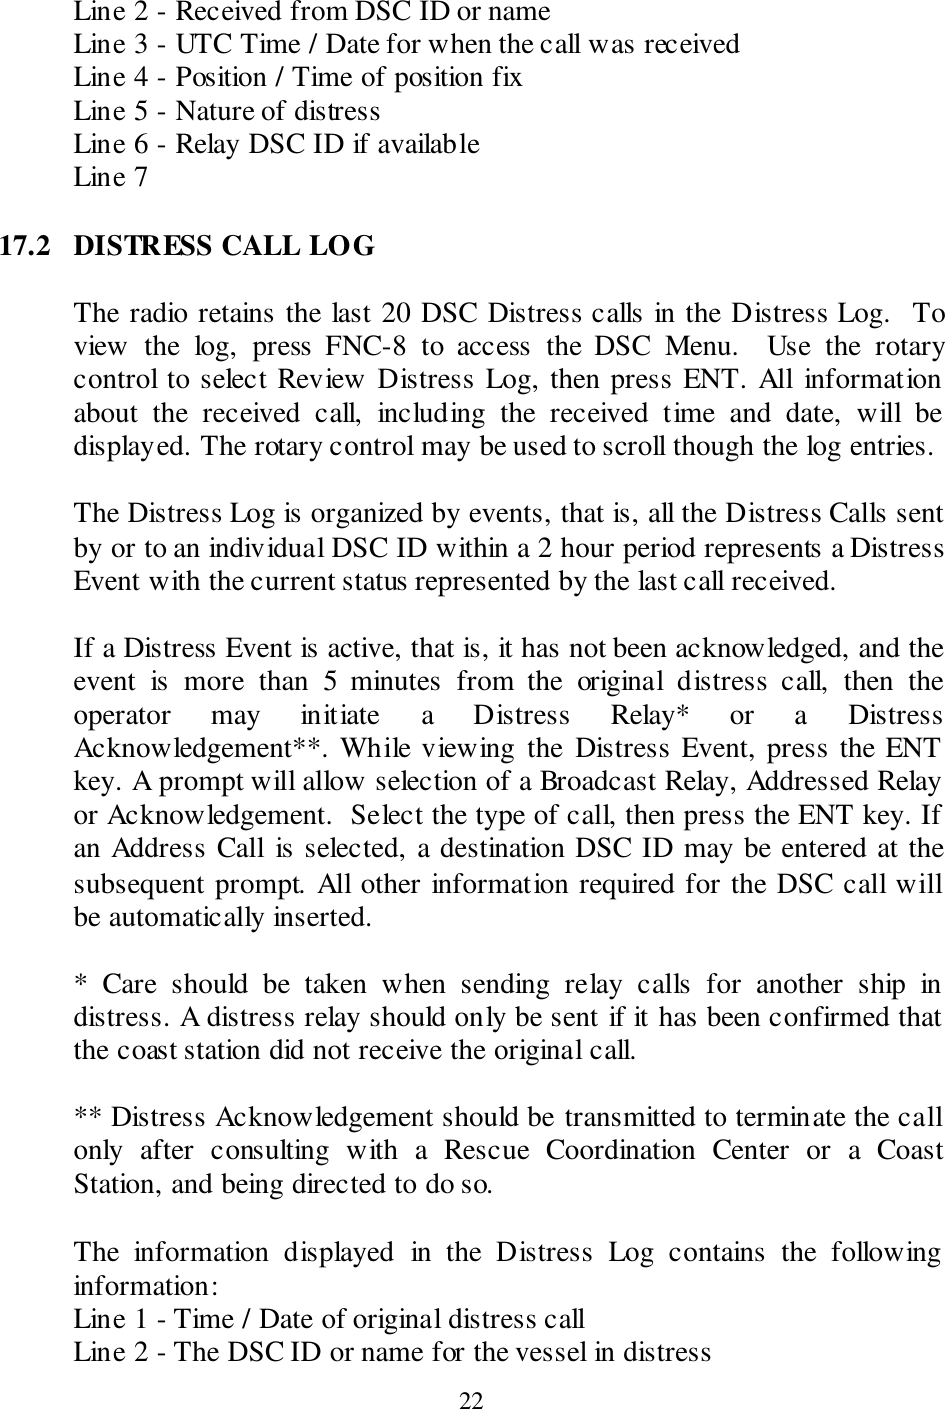  22 Line 2 - Received from DSC ID or name Line 3 - UTC Time / Date for when the call was received Line 4 - Position / Time of position fix Line 5 - Nature of distress Line 6 - Relay DSC ID if available Line 7   17.2  DISTRESS CALL LOG  The radio retains the last 20 DSC Distress calls in the Distress Log.  To view  the  log,  press  FNC-8  to  access  the  DSC  Menu.    Use  the  rotary control to select Review Distress Log, then press ENT. All information about  the  received  call,  including  the  received  time  and  date,  will  be displayed. The rotary control may be used to scroll though the log entries.    The Distress Log is organized by events, that is, all the Distress Calls sent by or to an individual DSC ID within a 2 hour period represents a Distress Event with the current status represented by the last call received.    If a Distress Event is active, that is, it has not been acknowledged, and the event  is  more  than  5  minutes  from  the  original  distress  call,  then  the operator  may  initiate  a  Distress  Relay*  or  a  Distress Acknowledgement**. While viewing the  Distress Event, press the ENT key. A prompt will allow selection of a Broadcast Relay, Addressed Relay or Acknowledgement.  Select the type of call, then press the ENT key. If an Address Call  is selected, a destination DSC ID may be entered at the subsequent prompt. All other information required for the DSC call will be automatically inserted.  *  Care  should  be  taken  when  sending  relay  calls  for  another  ship  in distress. A distress relay should only be sent if it has been confirmed that the coast station did not receive the original call.  ** Distress Acknowledgement should be transmitted to terminate the call only  after  consulting  with  a  Rescue  Coordination  Center  or  a  Coast Station, and being directed to do so.  The  information  displayed  in  the  Distress  Log  contains  the  following information: Line 1 - Time / Date of original distress call Line 2 - The DSC ID or name for the vessel in distress 